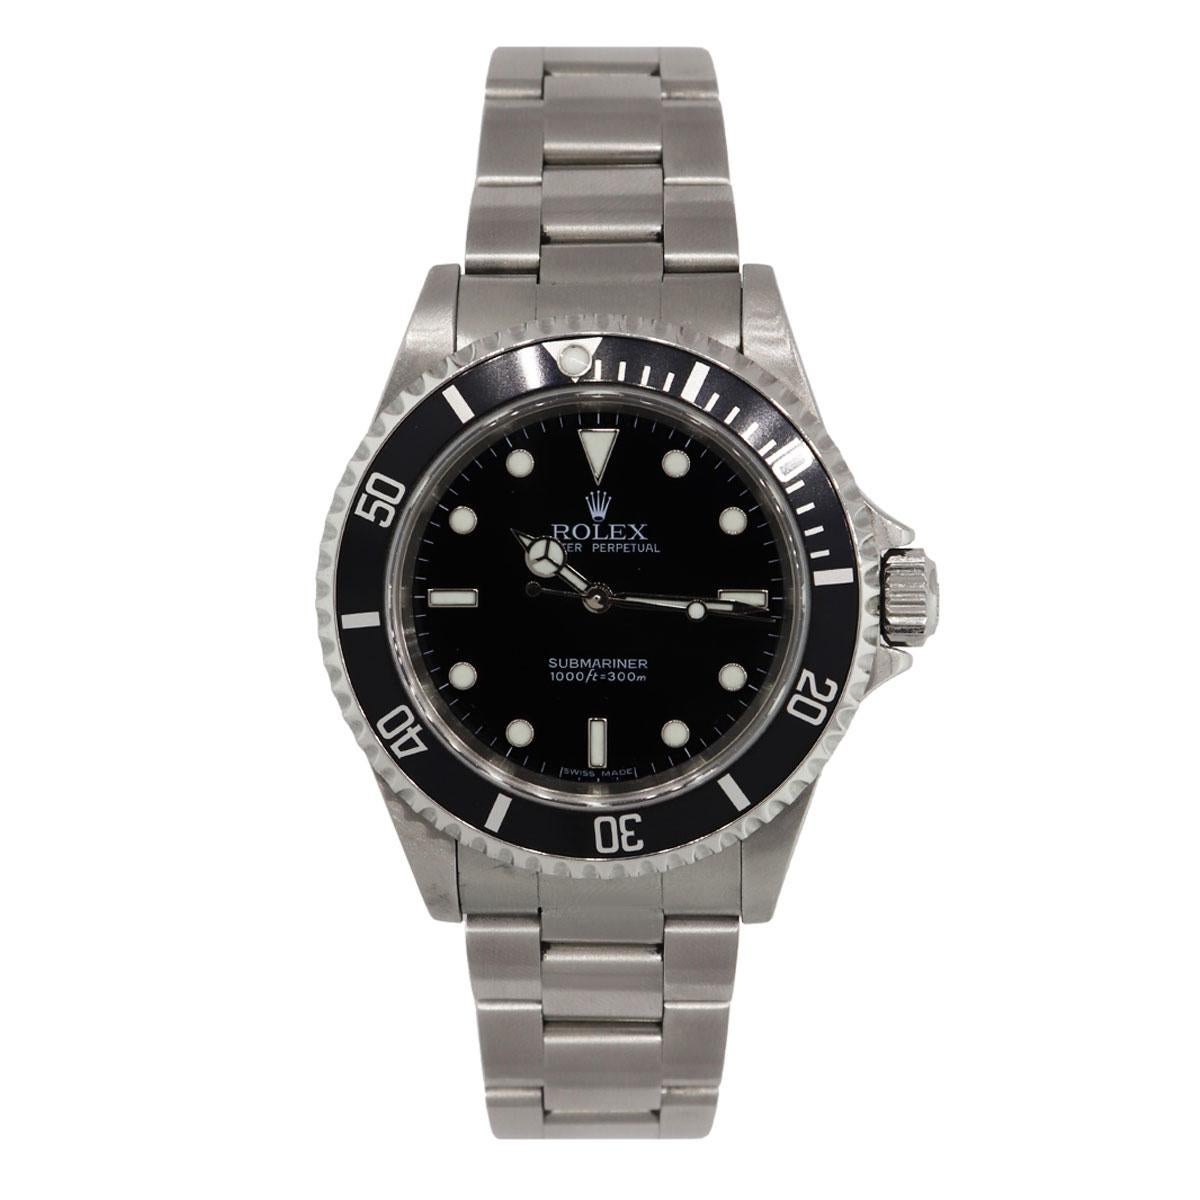 Brand: Rolex
MPN: 14060
Model: Submariner
Case Material: Stainless Steel
Case Diameter: 40mm
Crystal: Sapphire crystal
Bezel: Unidirectional black bezel
Dial: Black dial (non date)
Bracelet: Stainless steel oyster band
Size: Will fit a 7.75″